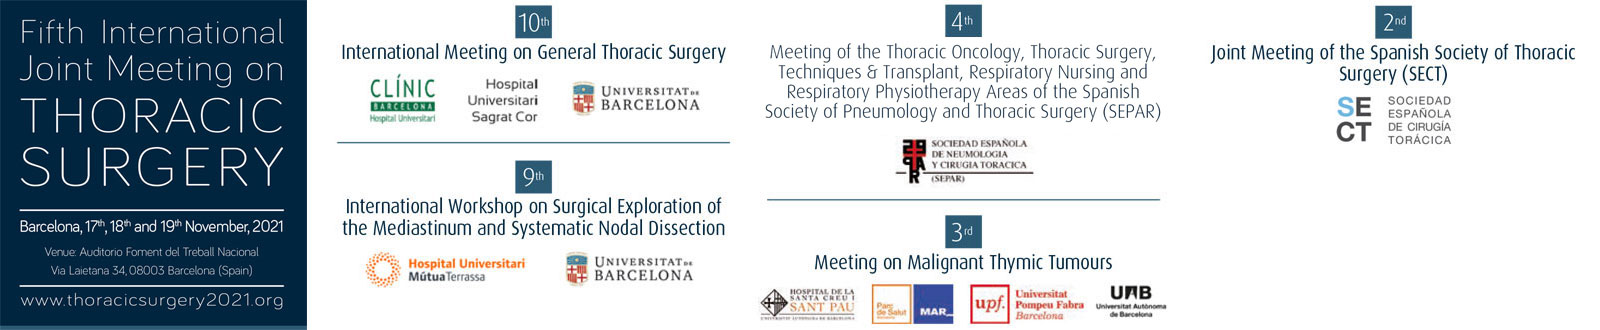 Fifth International Joint Meeting on THORACIC SURGERY 2021